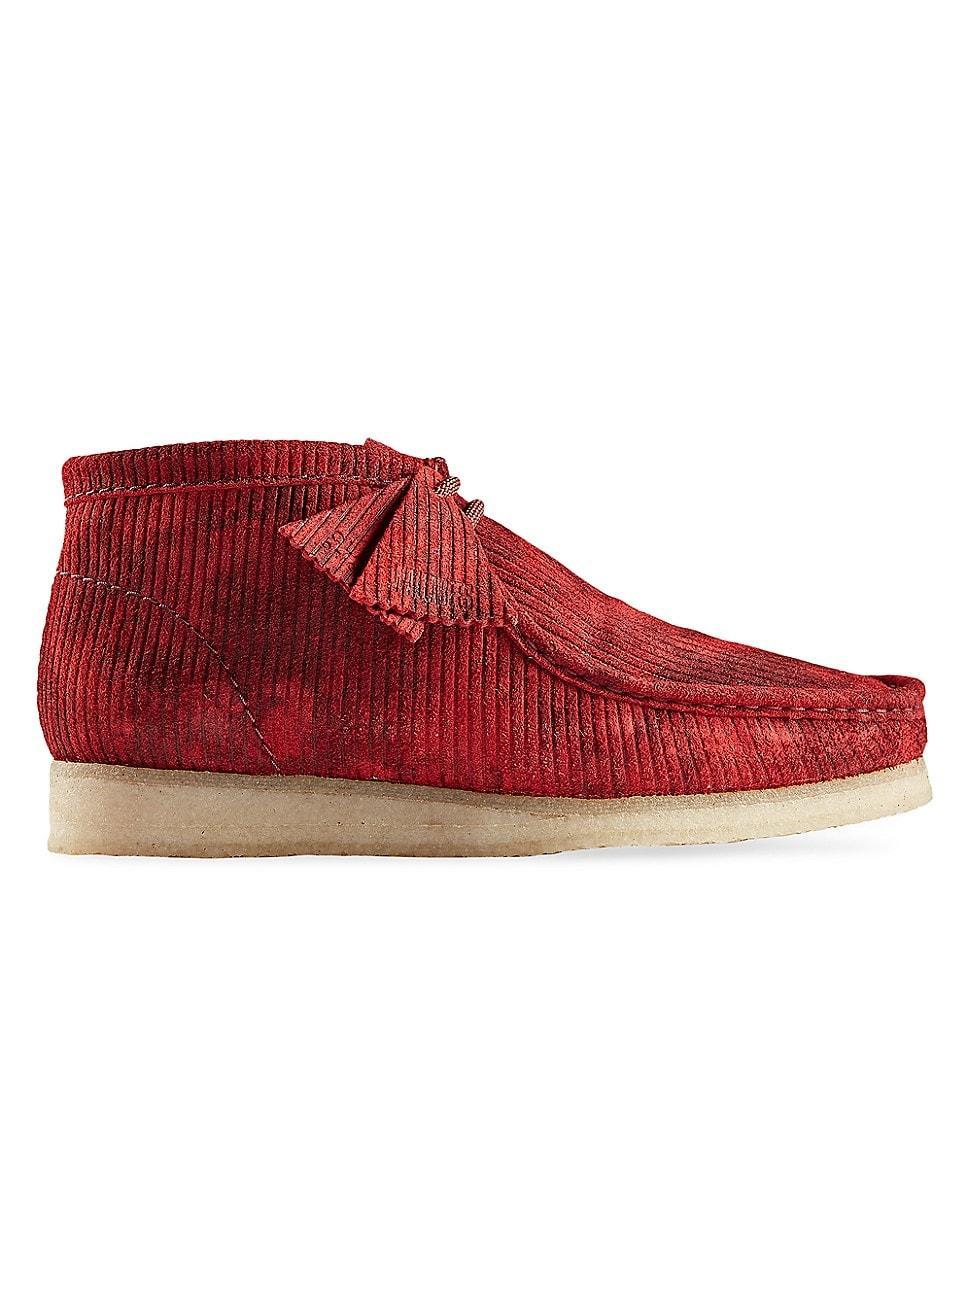 Mens Wallabee Suede Boots Product Image